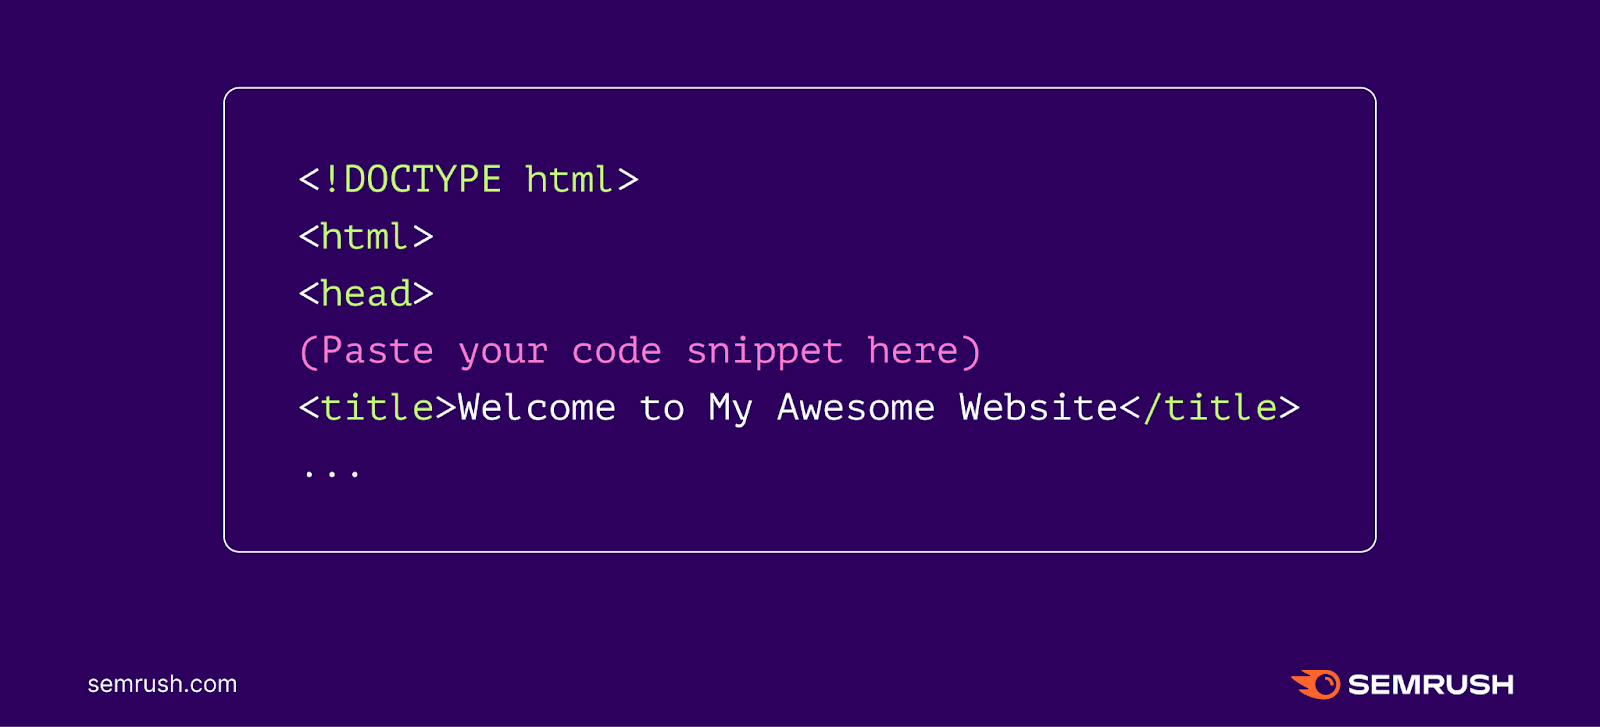 An image showing where to paste your code snippet in HTML